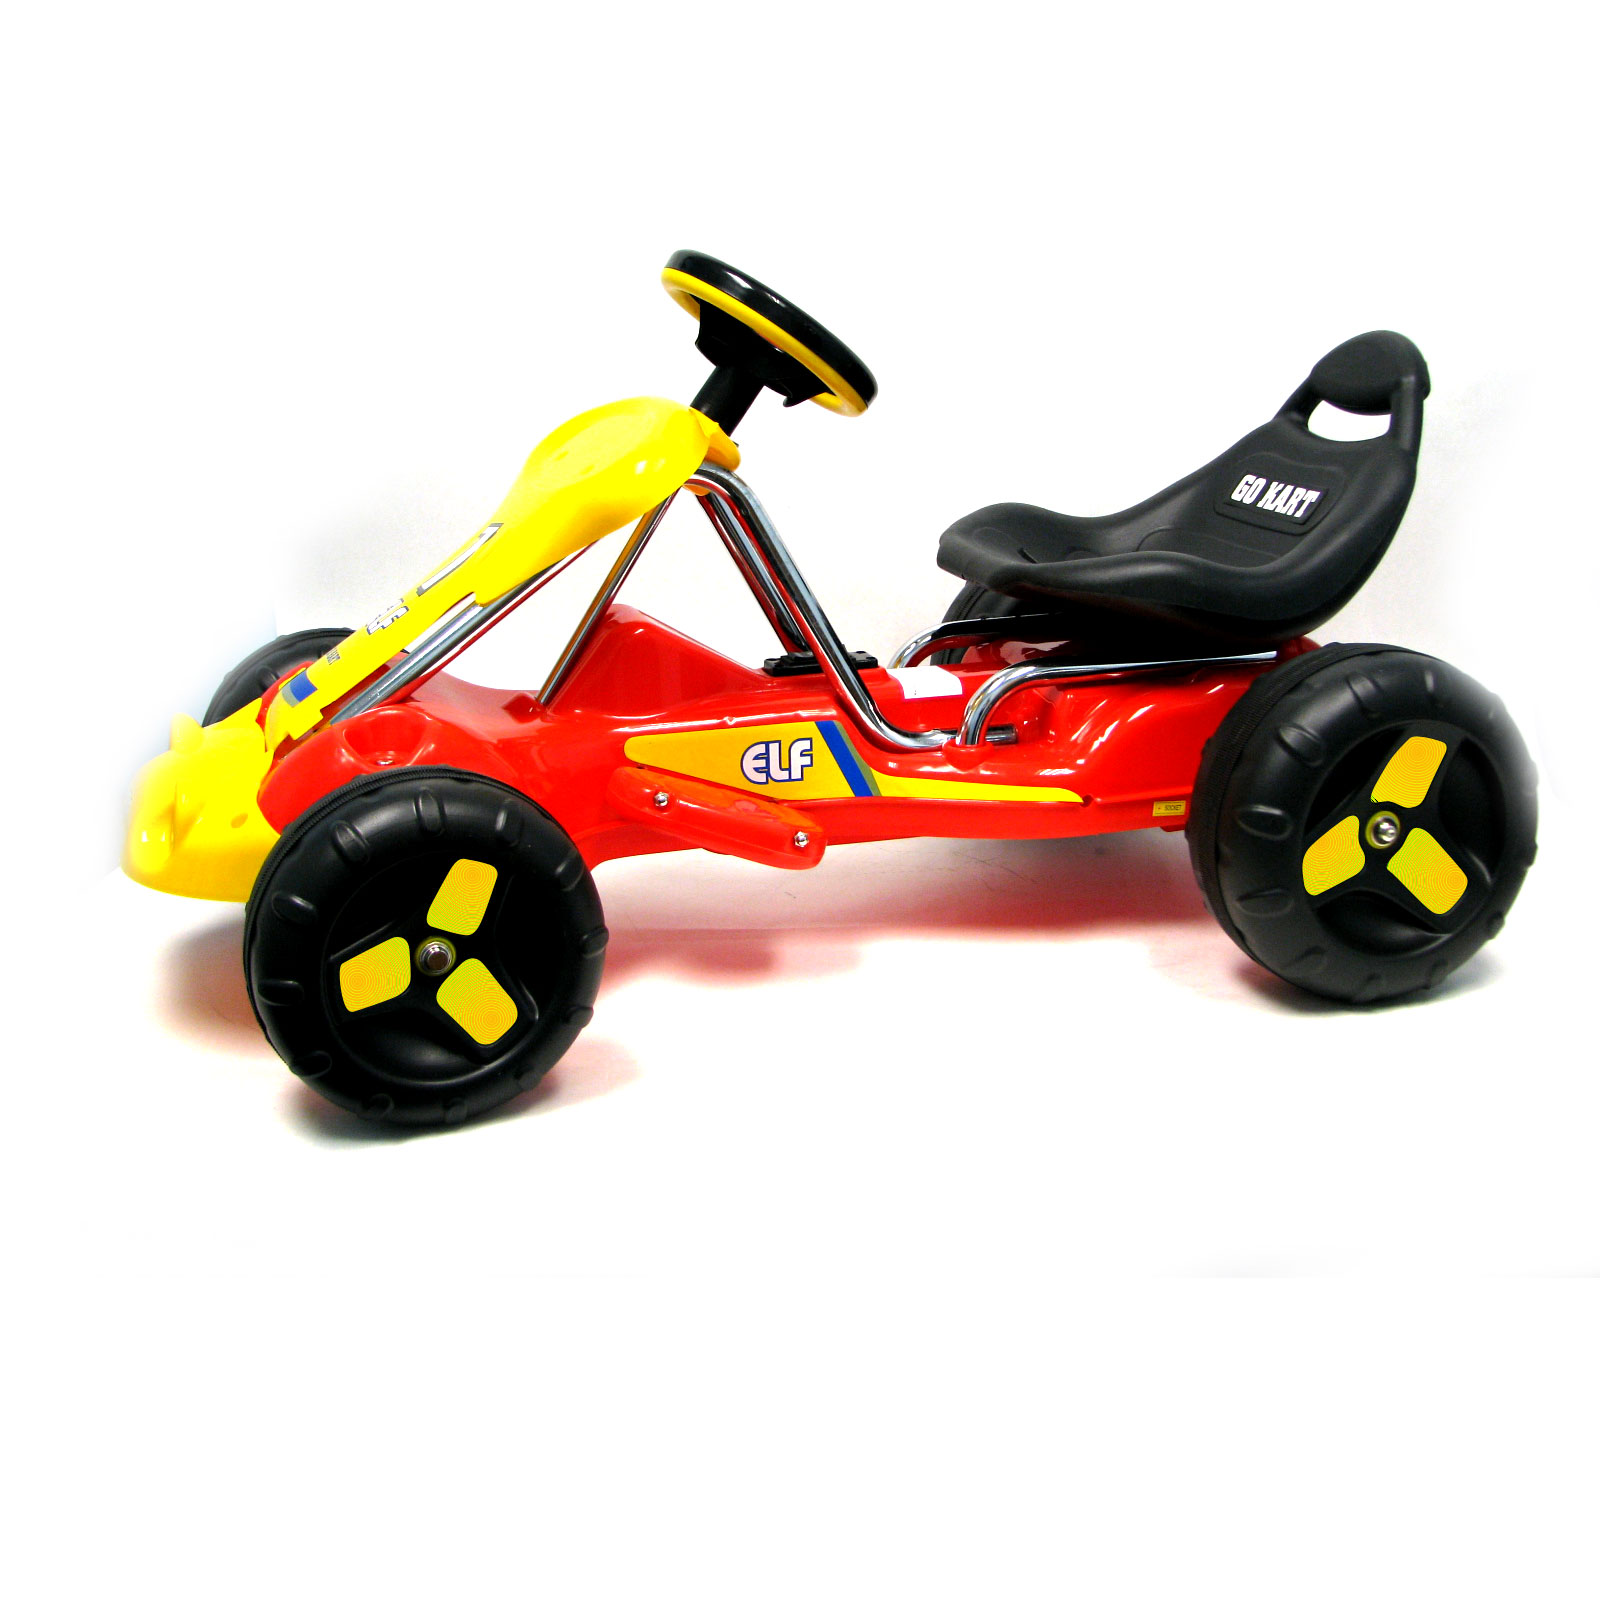 battery powered riding toys for 3 year olds